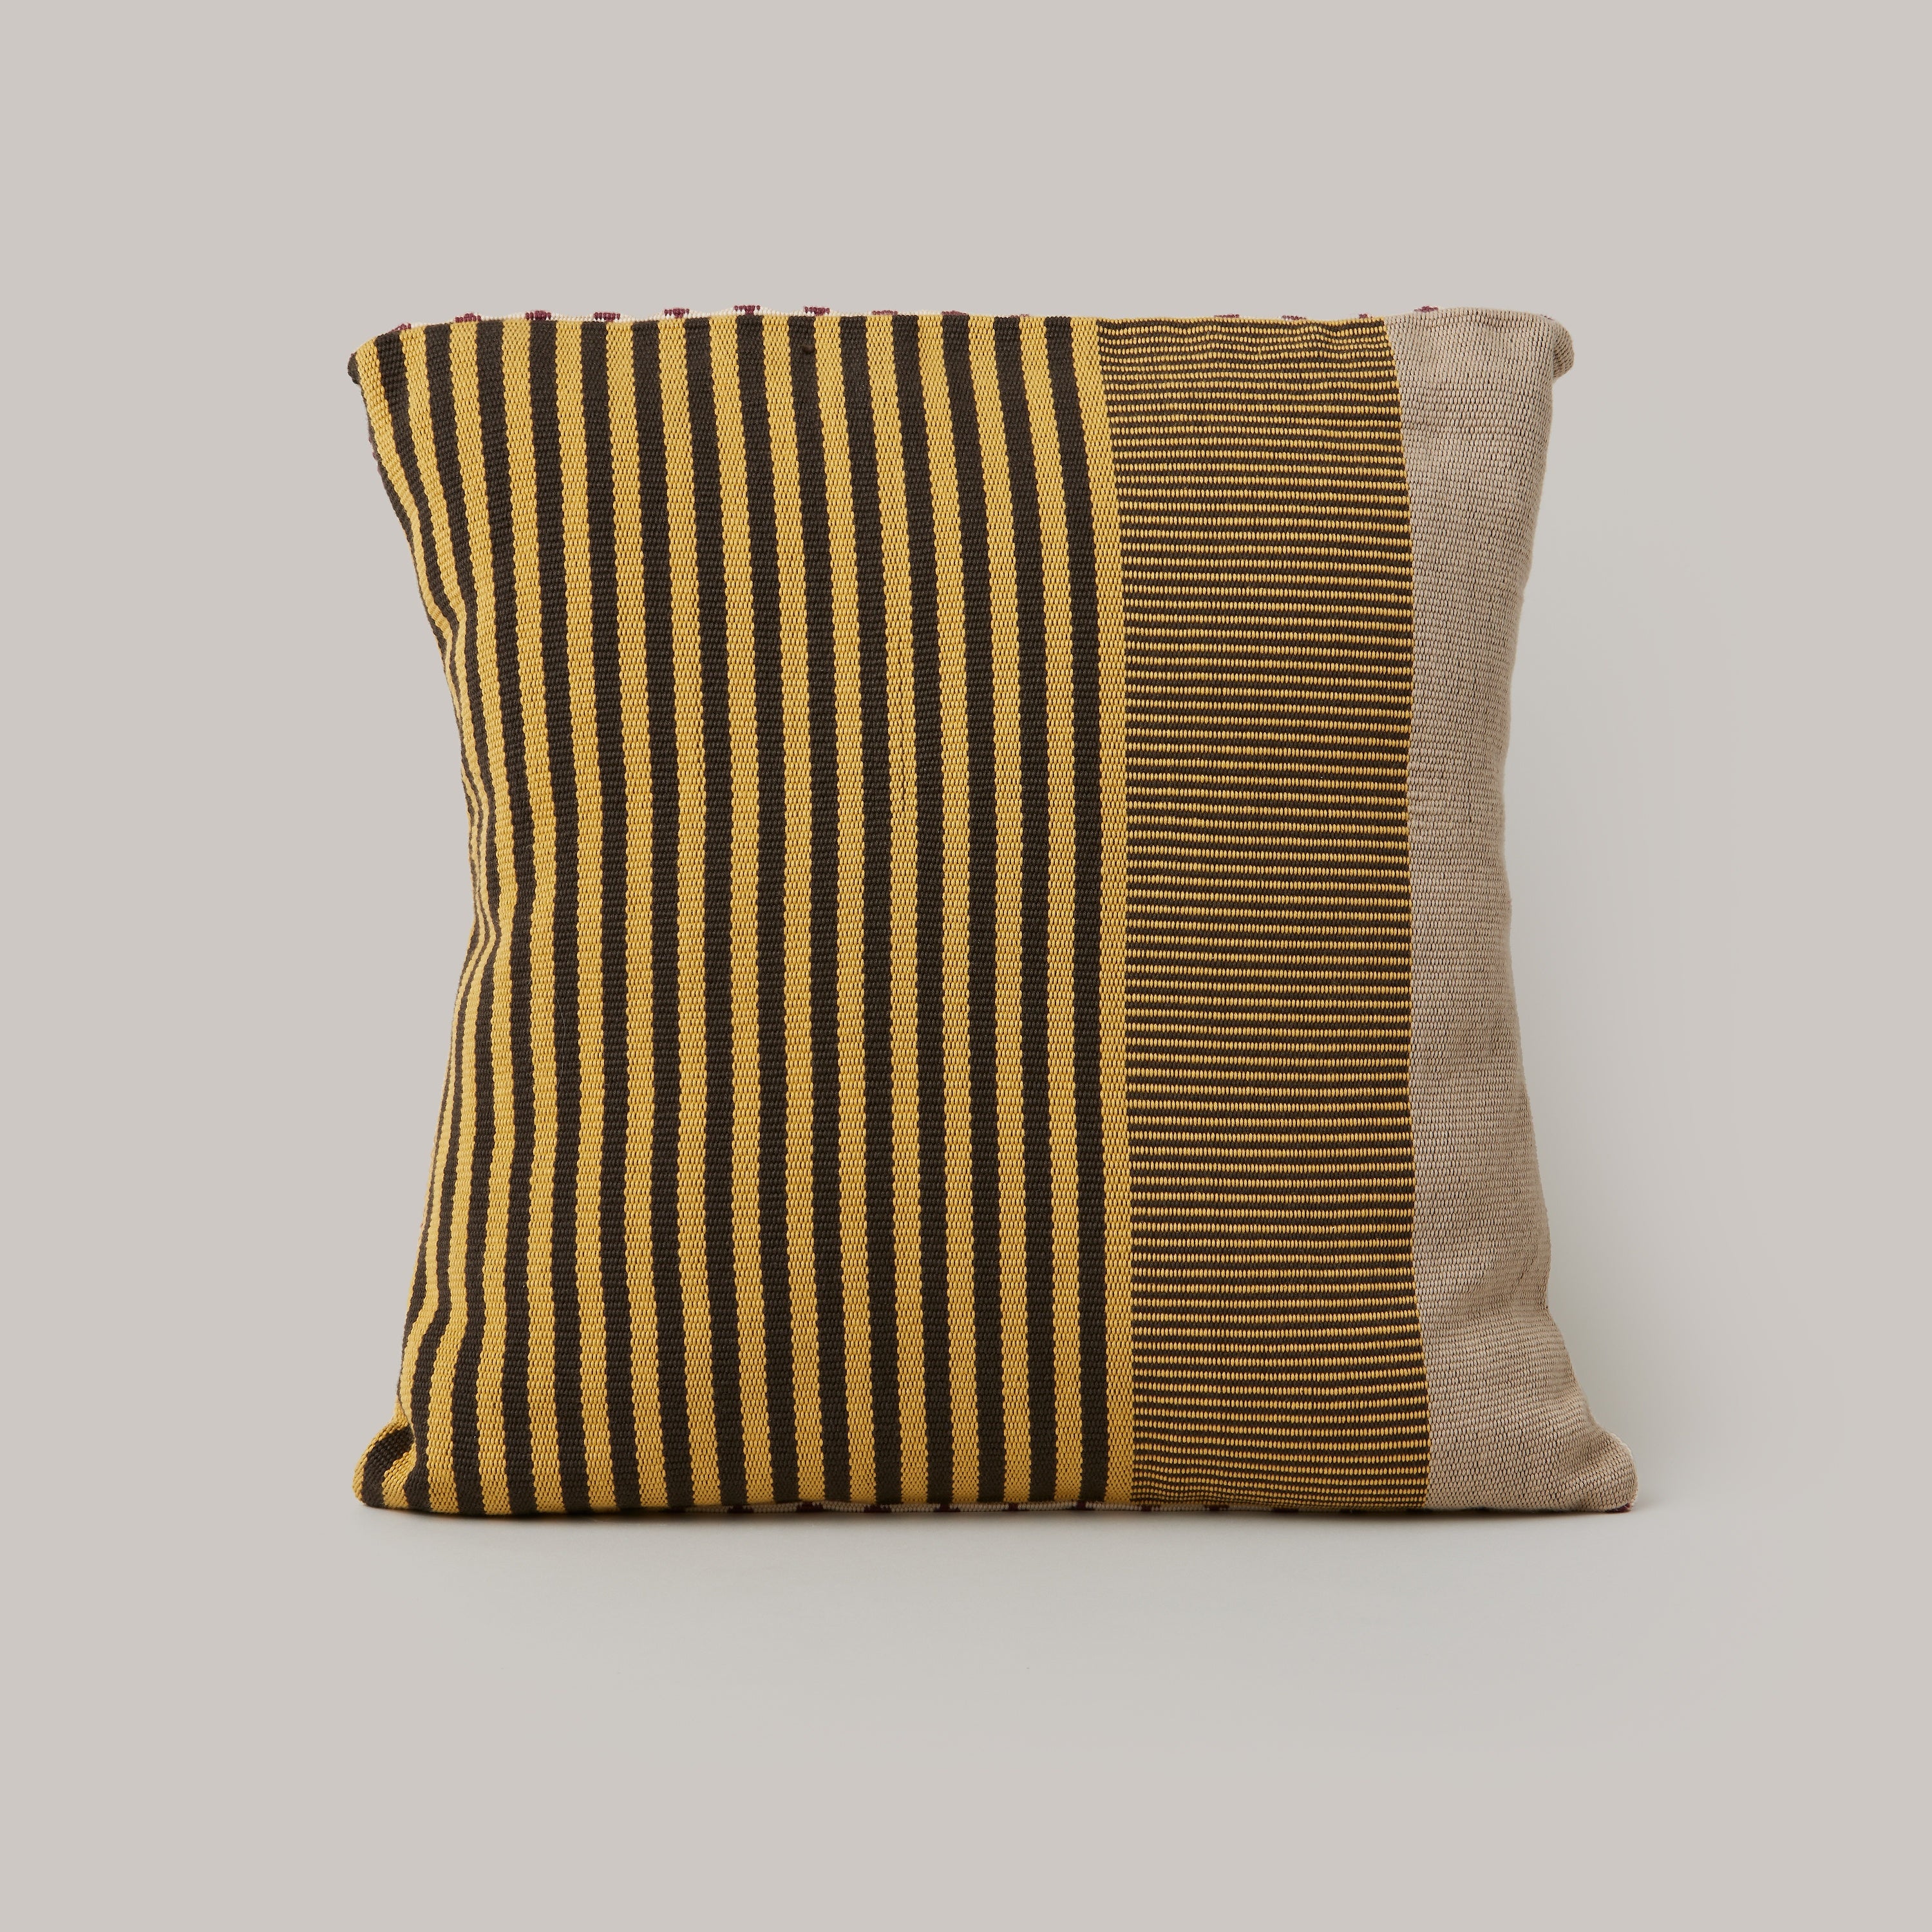 Hand-loomed cotton pillows